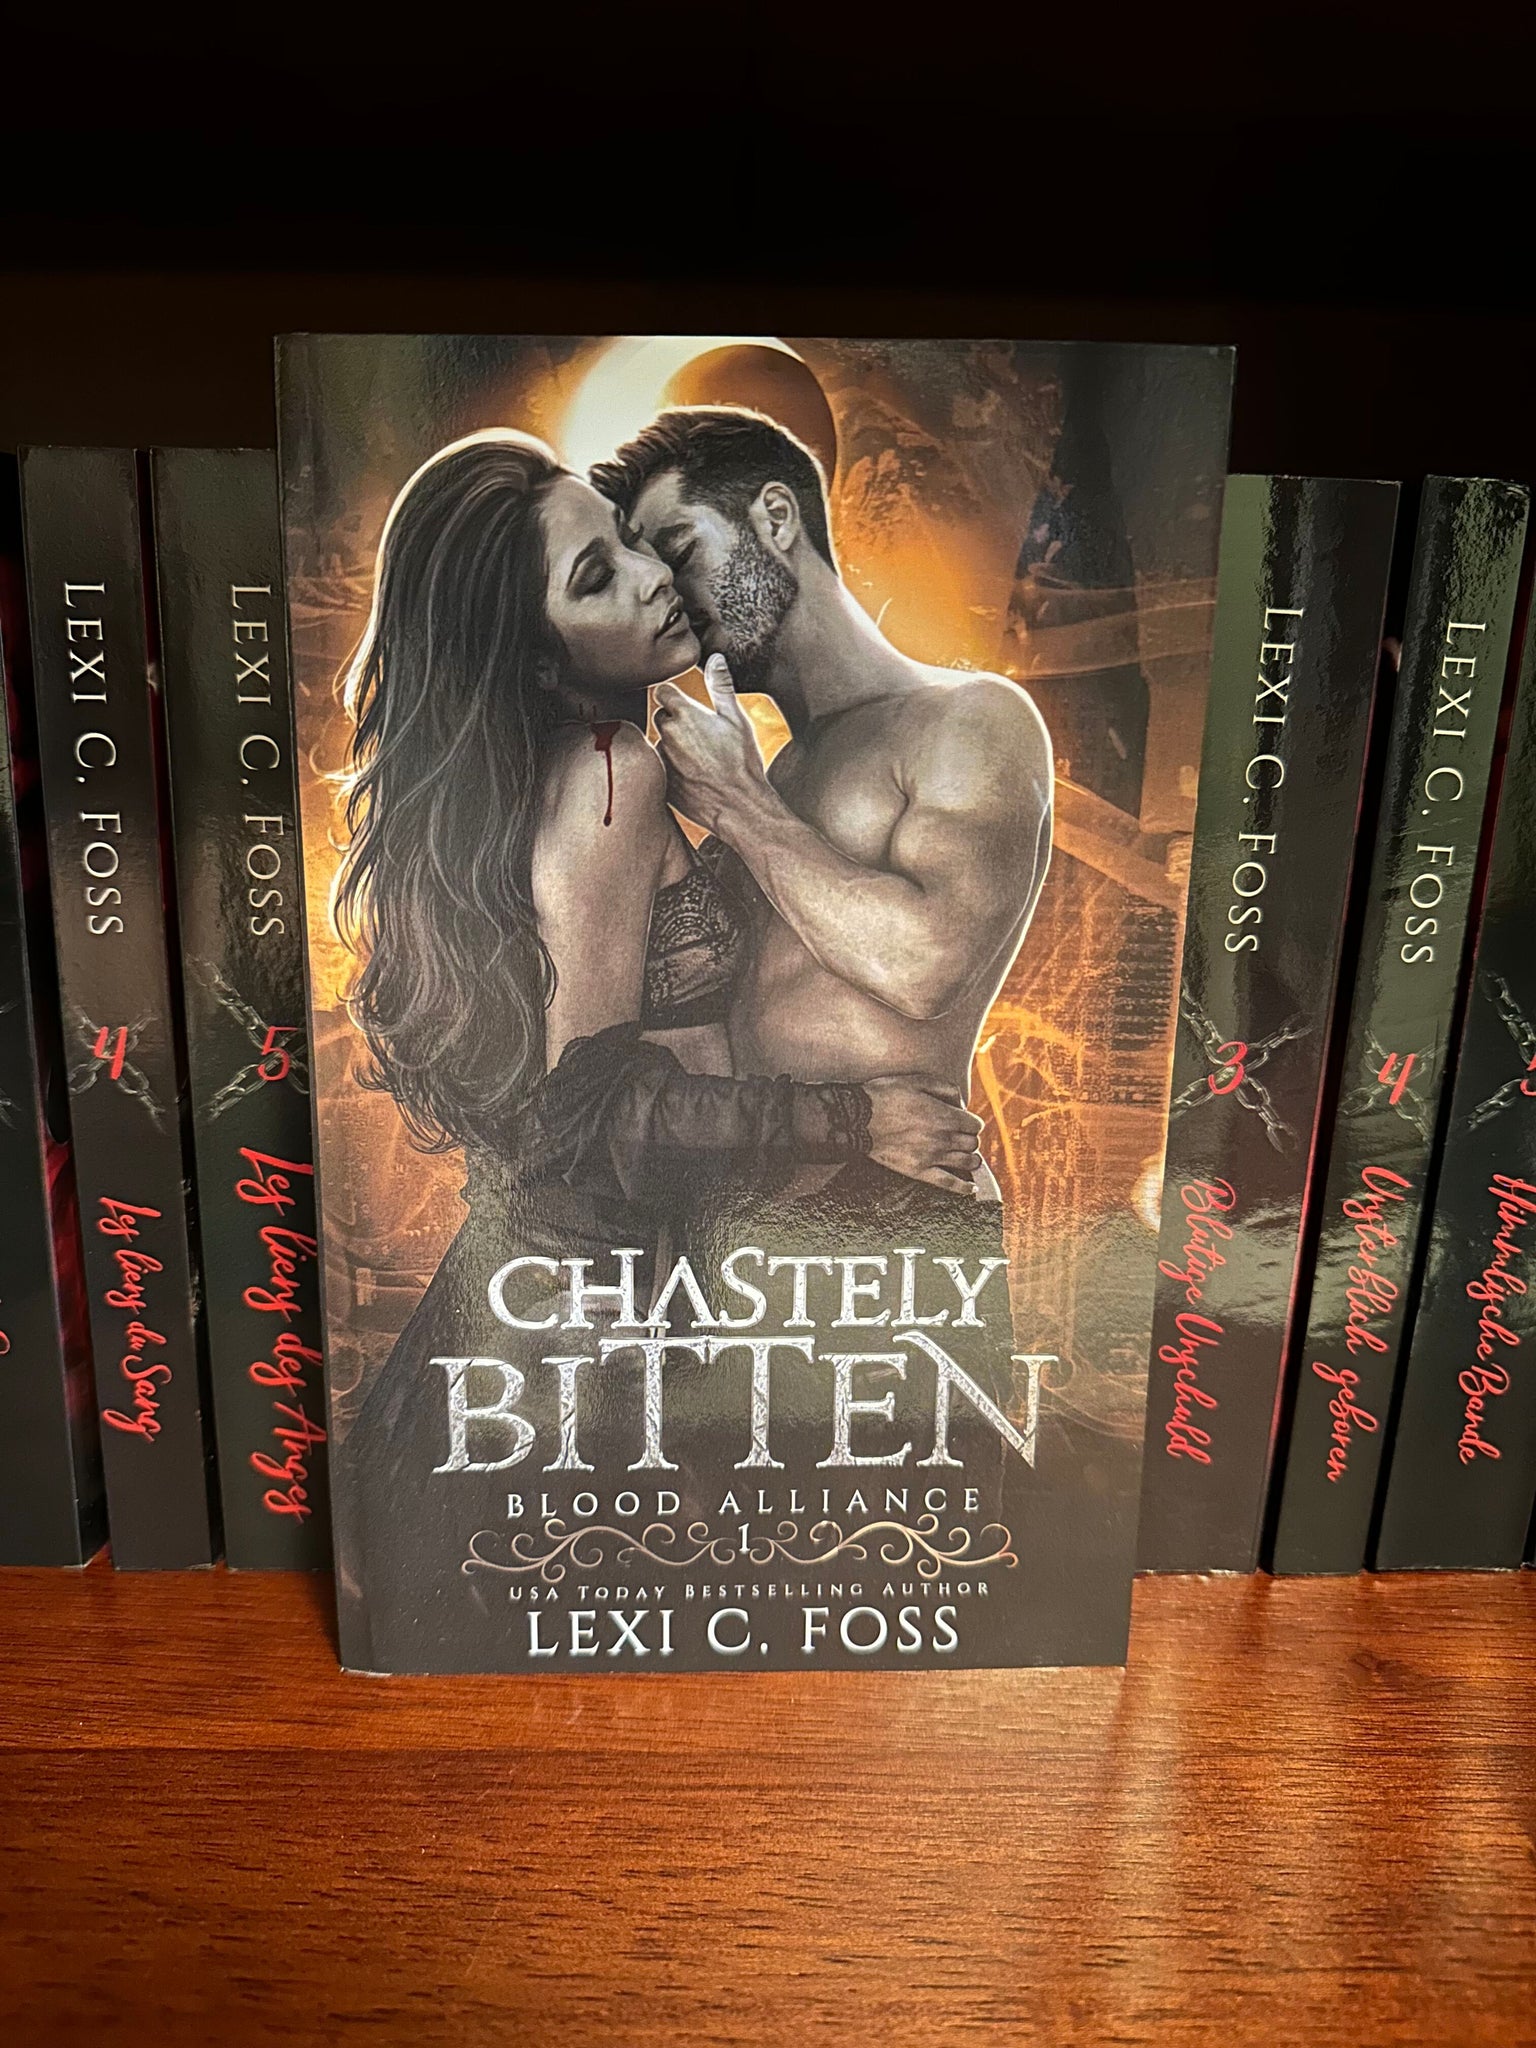 Chastely Bitten-Special Edition Paperback (Blood Alliance: Book 1)